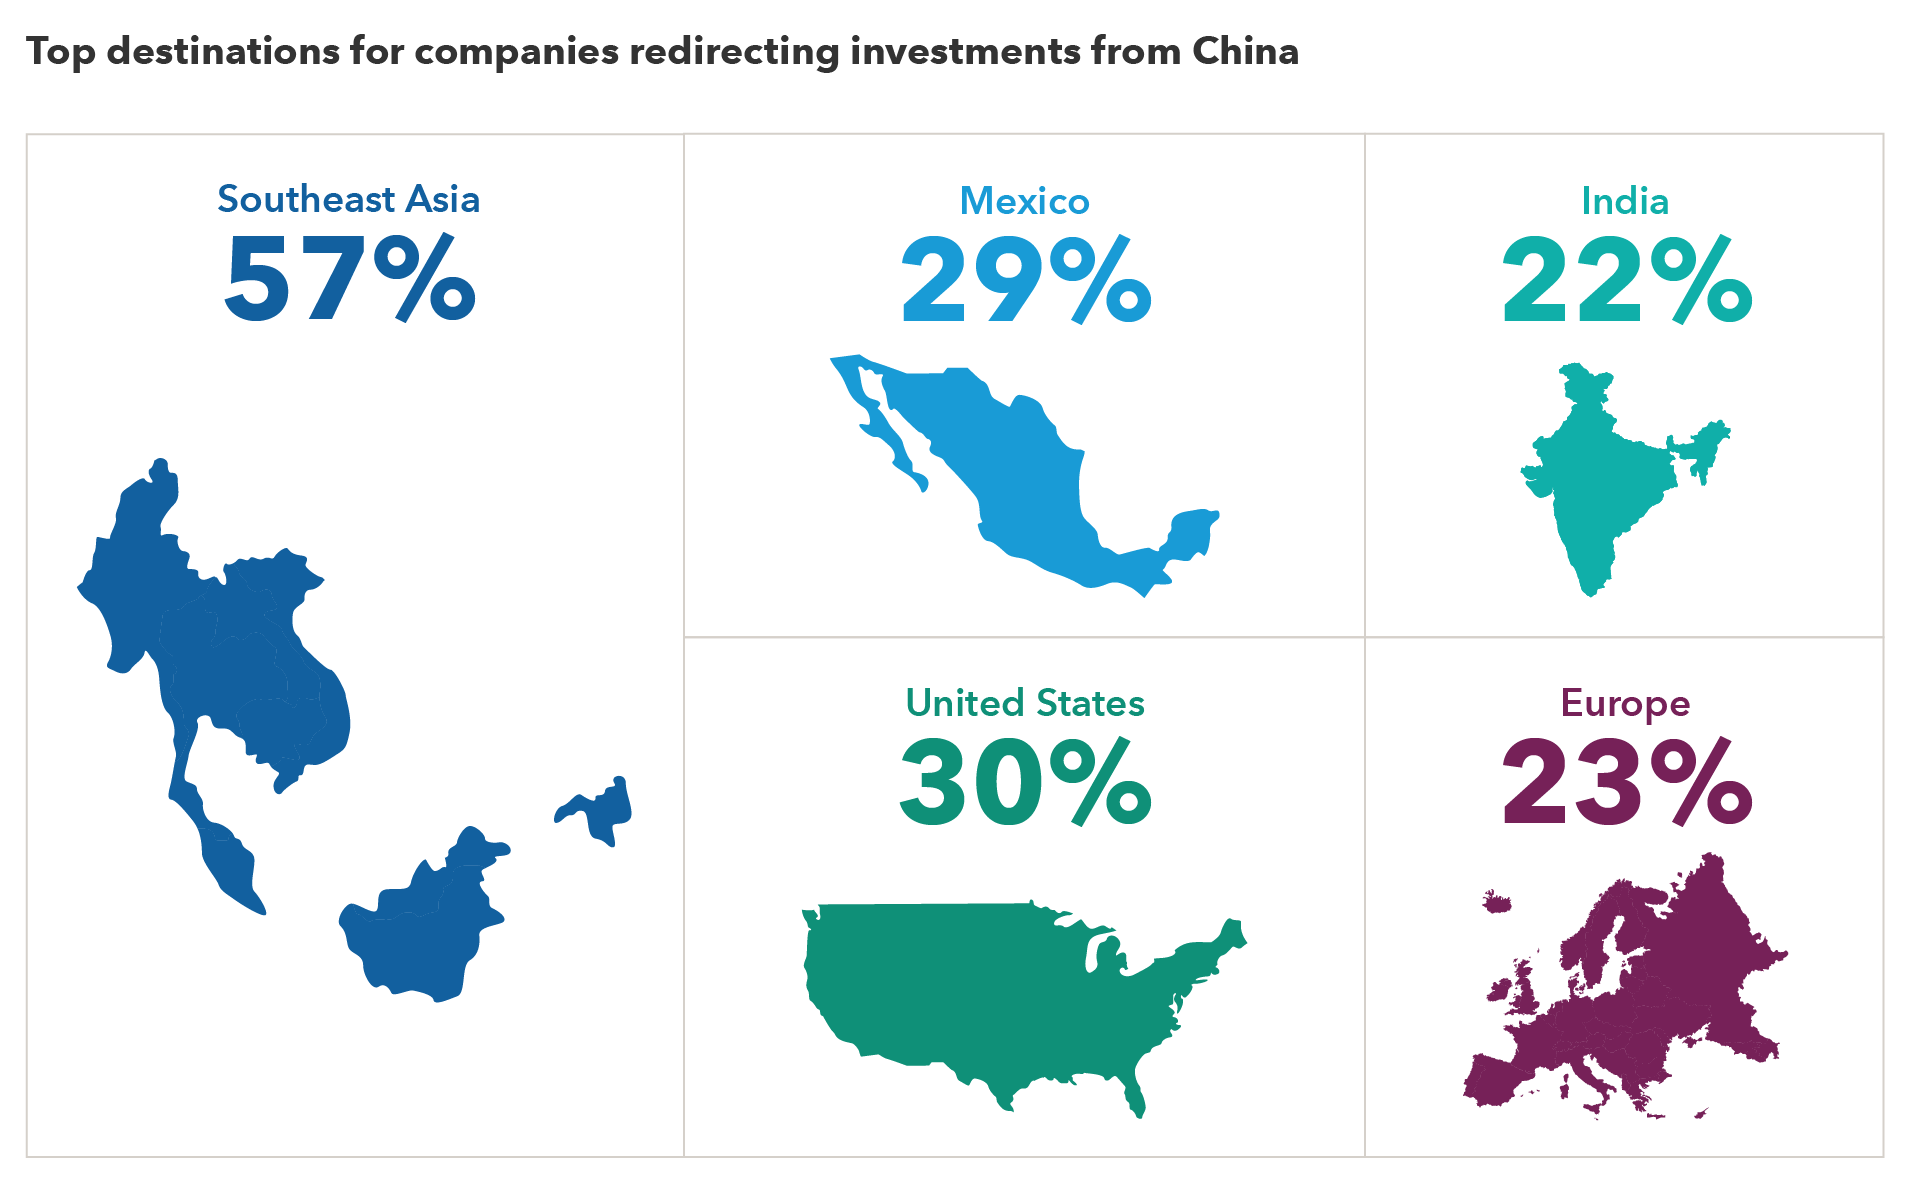 The image shows the top destinations companies are choosing when redirecting investments from China. According to a survey by AmCham Shanghai, 57% of redirected investments from China are going to Southeast Asia, 30% are going to the United States, 29% are going to Mexico, 23% are going to Europe and 22% are going to India.